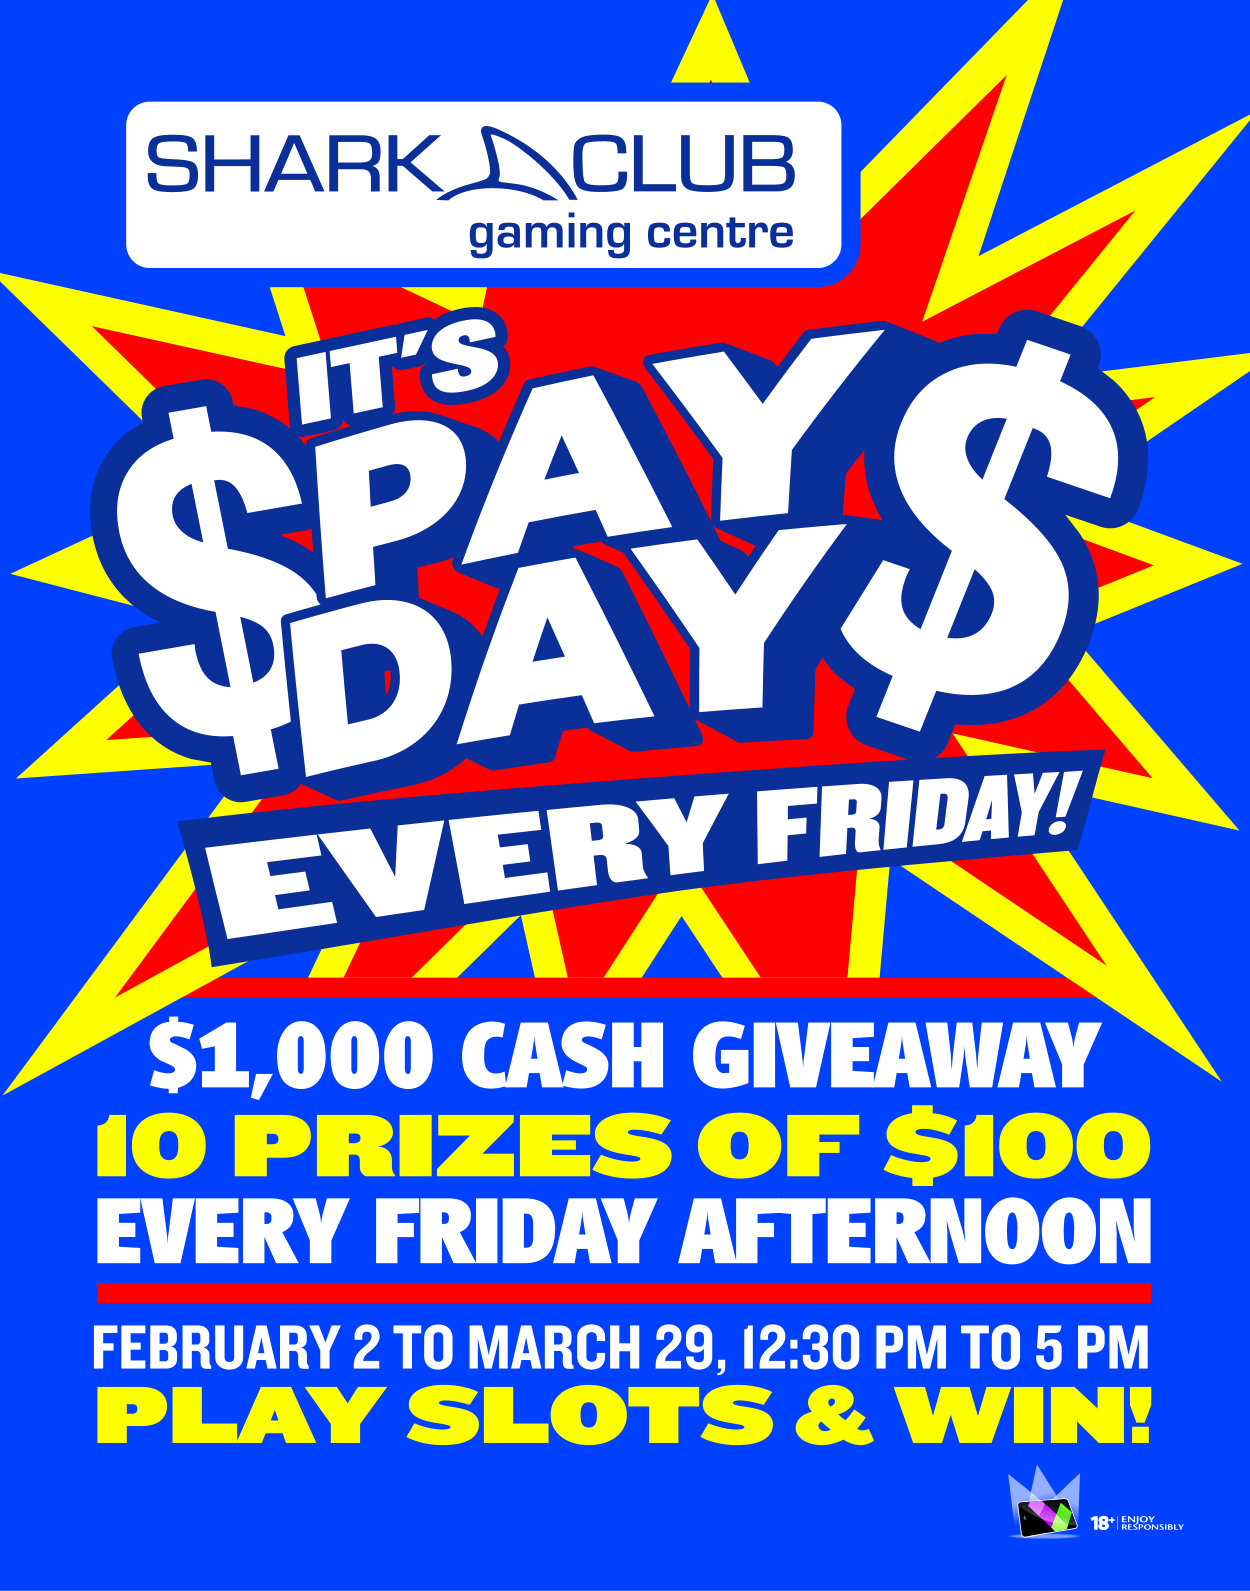 It’s Pay Day Every Friday! $1,000 cash giveaway – 10 prizes of $100 February 2 to March 29, 12:30 pm to 5:00 pm every Friday! Play Slots & Win!